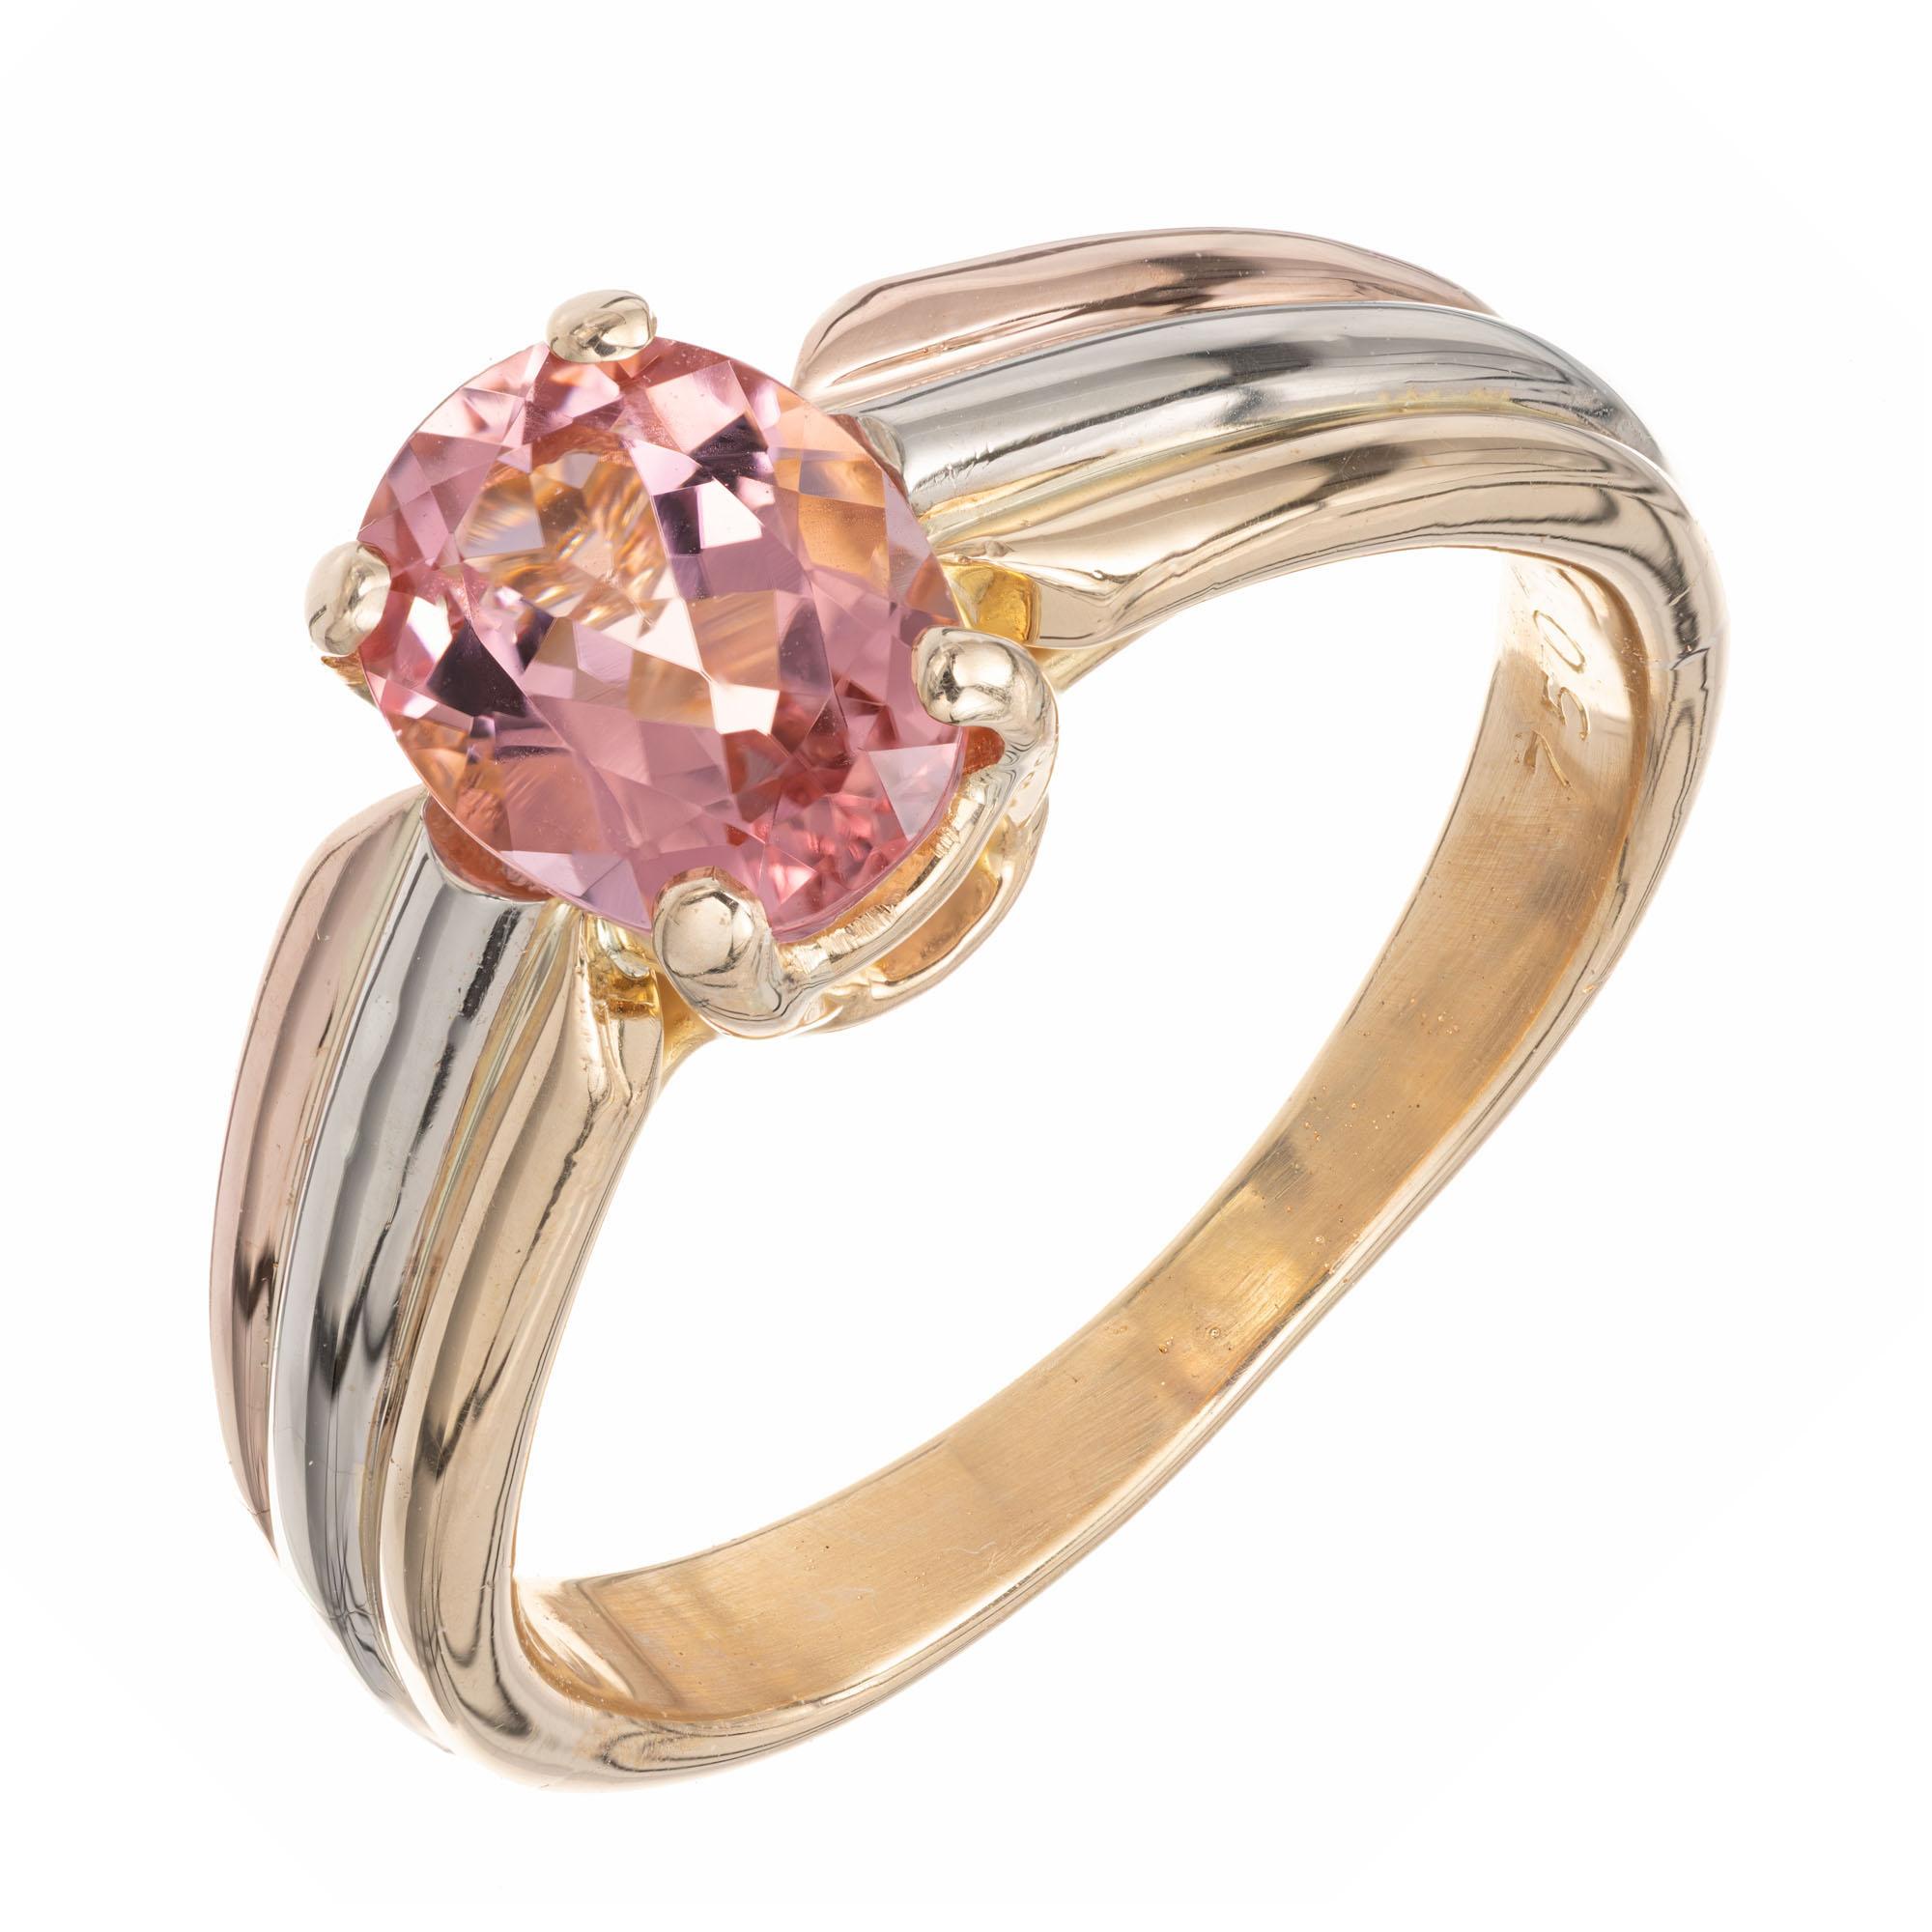 Cartier bright pink oval center tourmaline, in a tri-color, rose, white and yellow gold 18k gold setting. 

1 oval pink tourmaline VS, approx.  1.00ct
Size 6.5 and sizable
18k yellow gold 
Stamped: 750
Hallmark: Cartier
5.3 grams
Width at top: